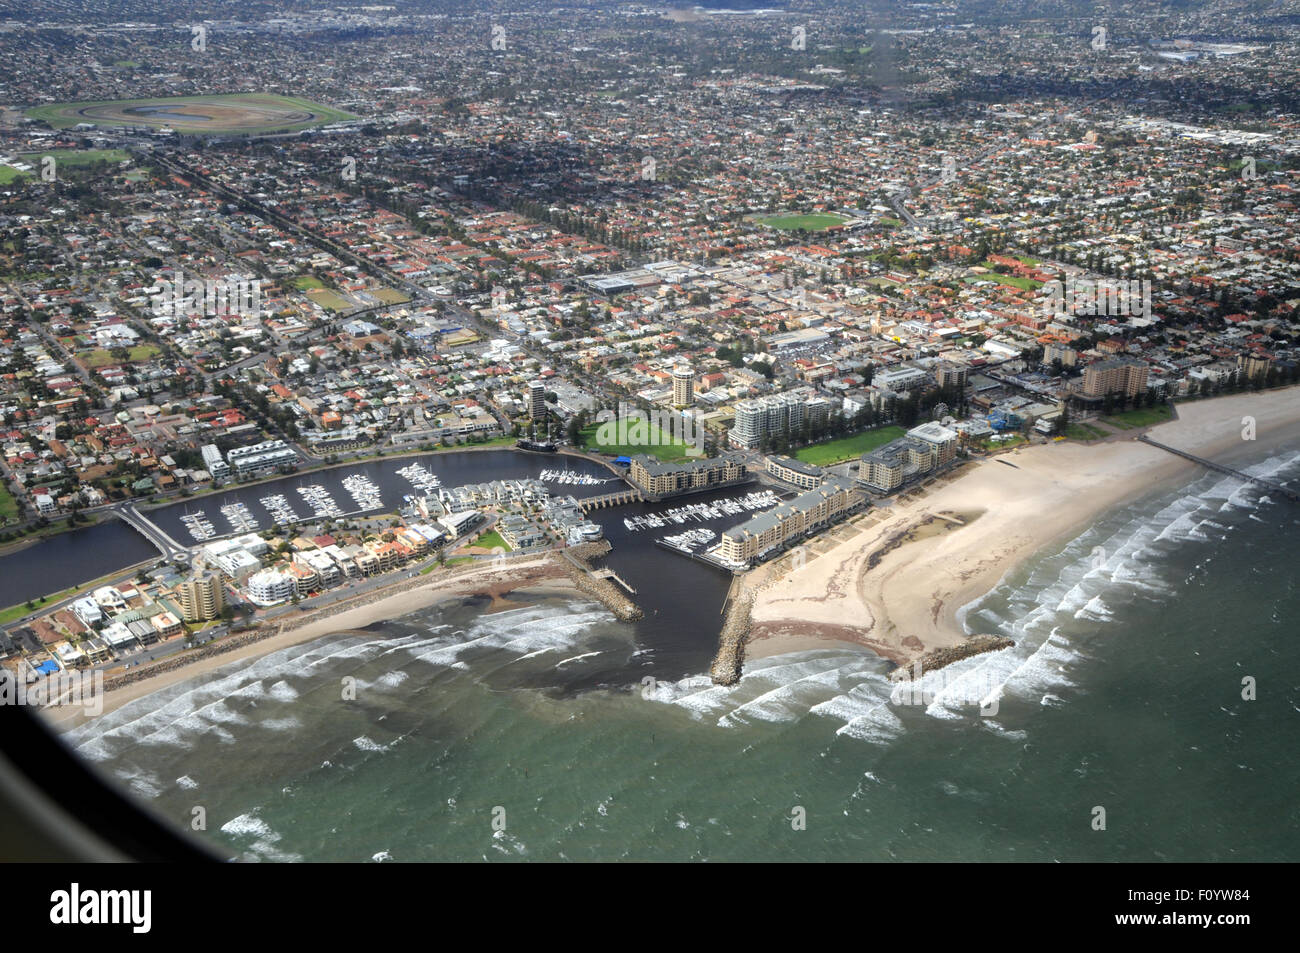 Aerial view of Glenelg, South Australia, showing boat haven and  where Patawalonga River flows into the sea. Stock Photo